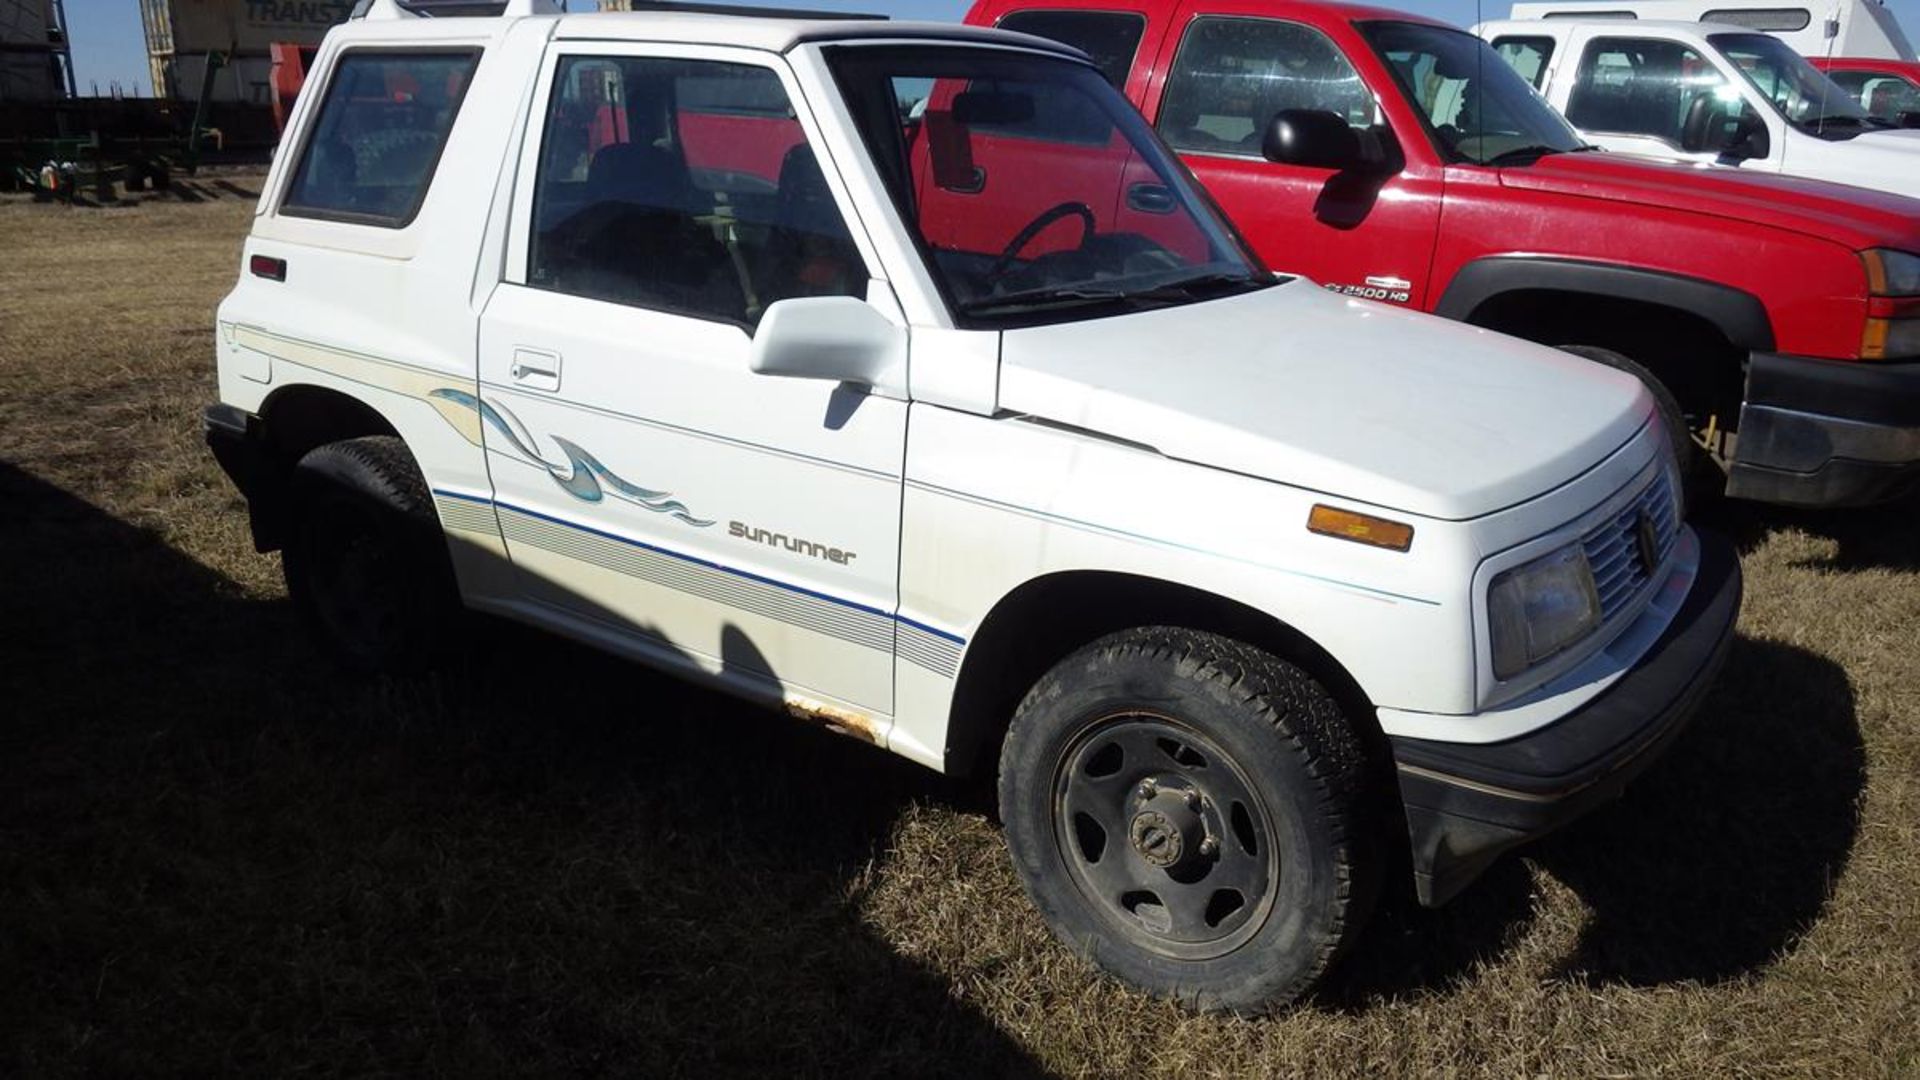 1995 Pontiac Sunrunner 4 x 4 with 4 spd manual tranny, 191,465 KMS, Vin# 2CGBJ1868S6929399 removable - Image 5 of 16